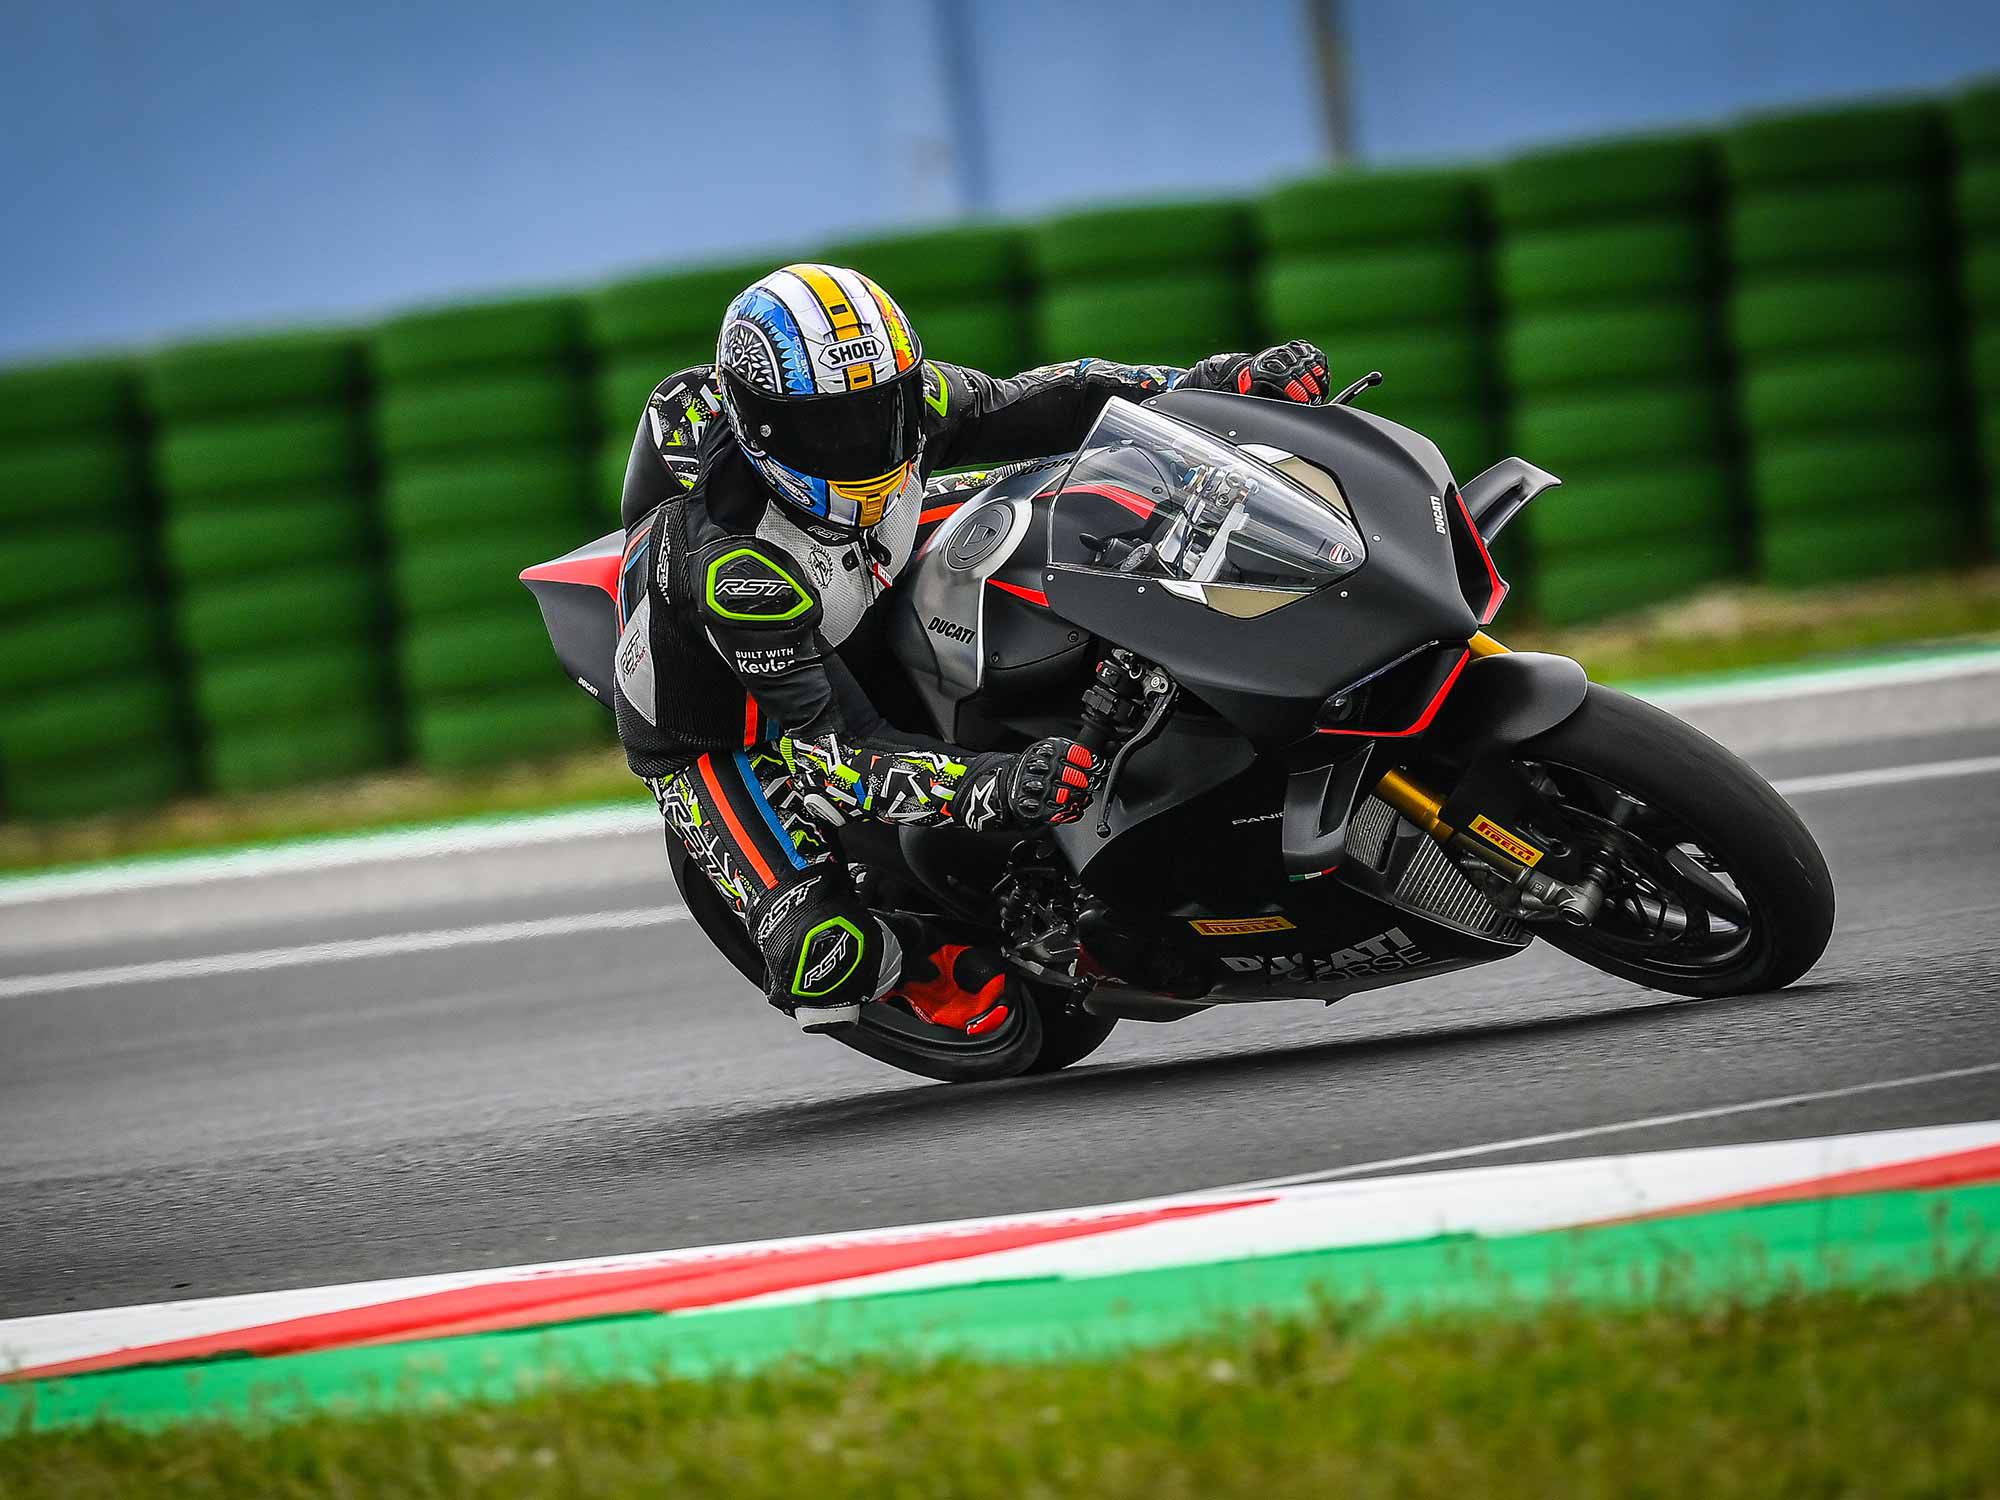 The first section of Misano is ultra-technical, all about clipping false apexes, letting the bike drift wide, then pulling it back into the corner. SP2 territory.